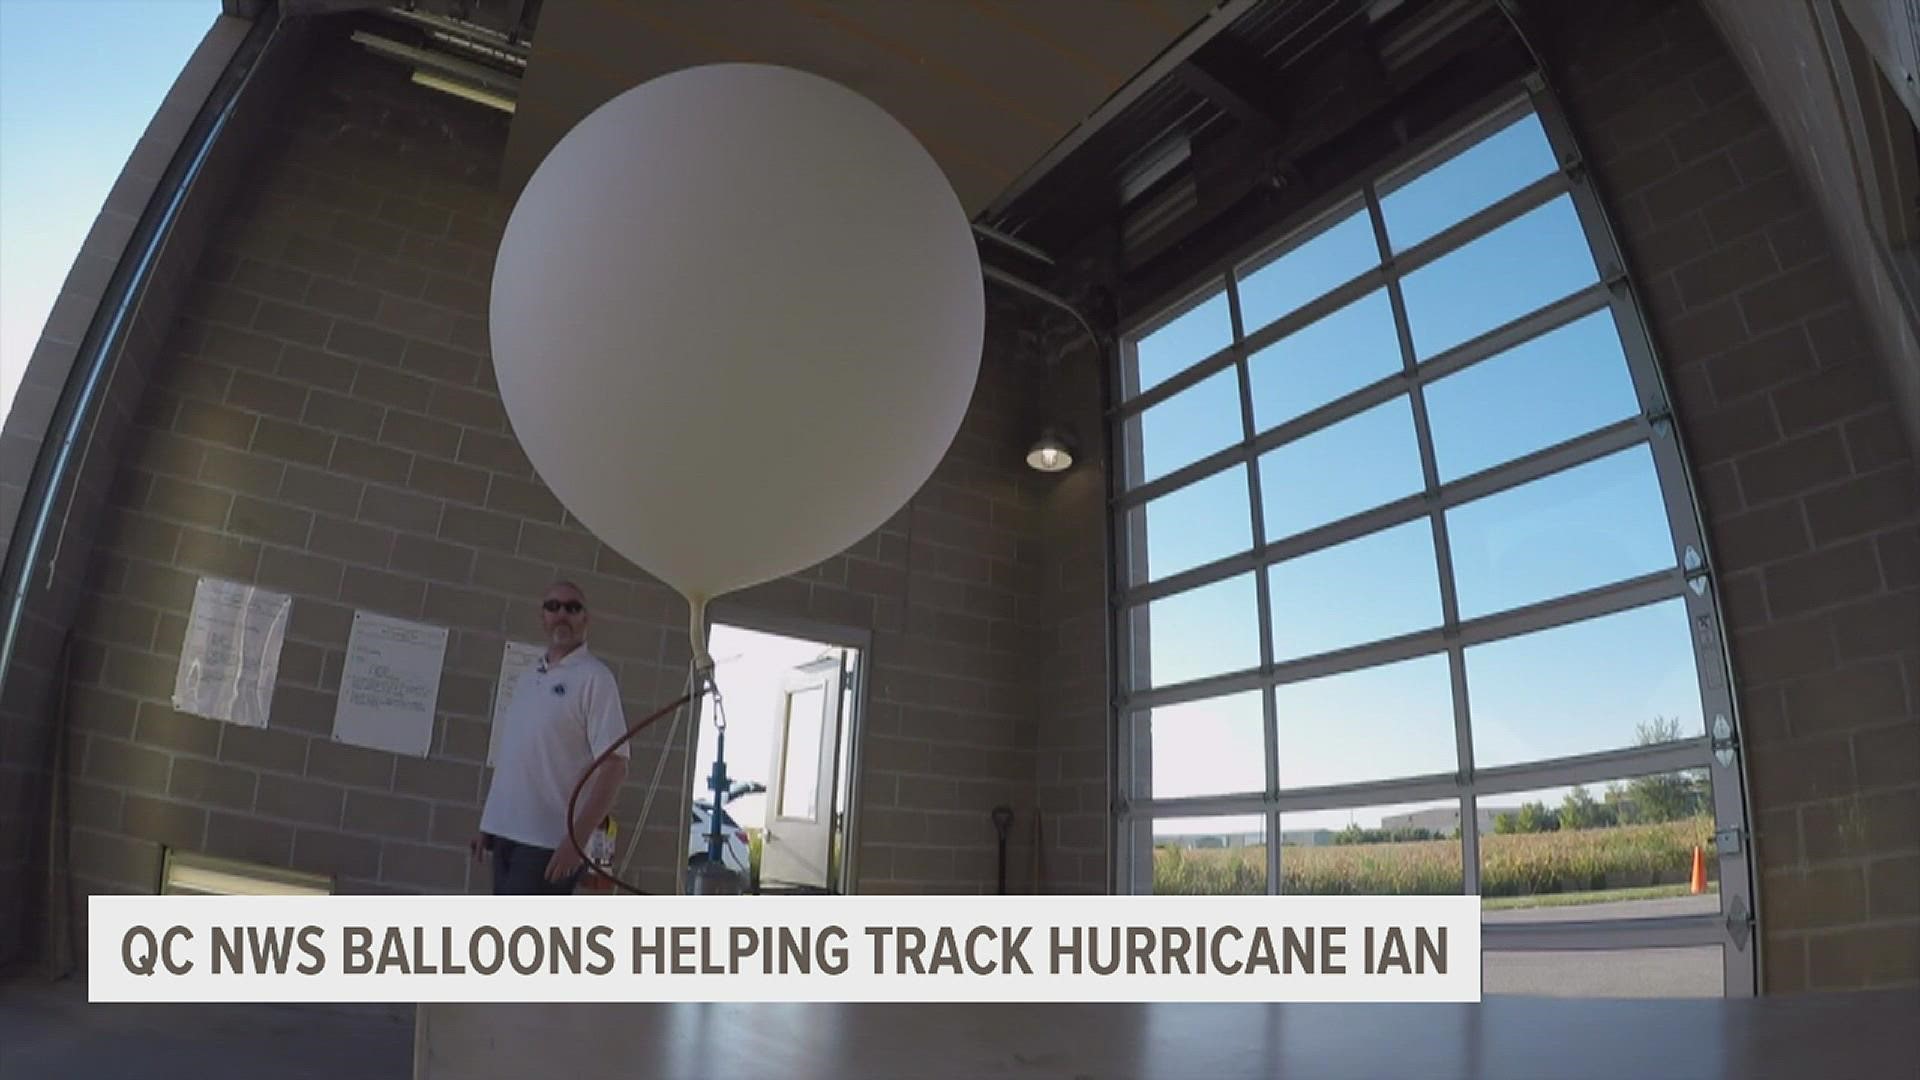 The weather balloons will fly around the Midwest and help track wind direction, speed, temperature, and other useful data points.